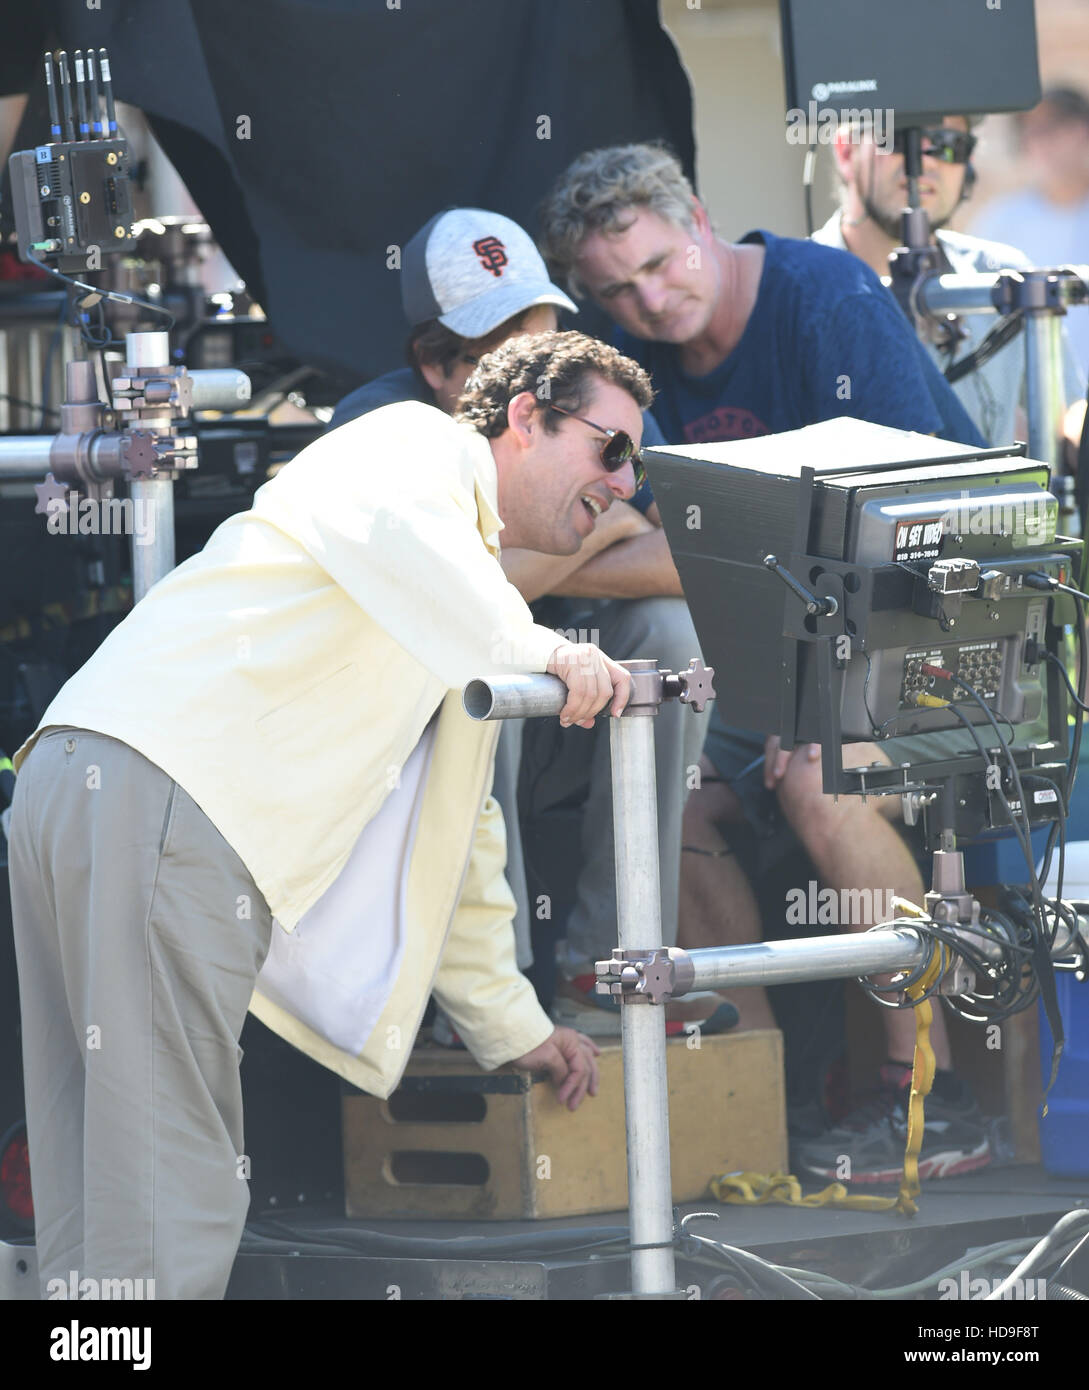 Adam Sandler on the set of his new film 'Sandy Wexler'  Featuring: Adam Sandler Where: Los Angeles, California, United States When: 19 Sep 2016 Stock Photo